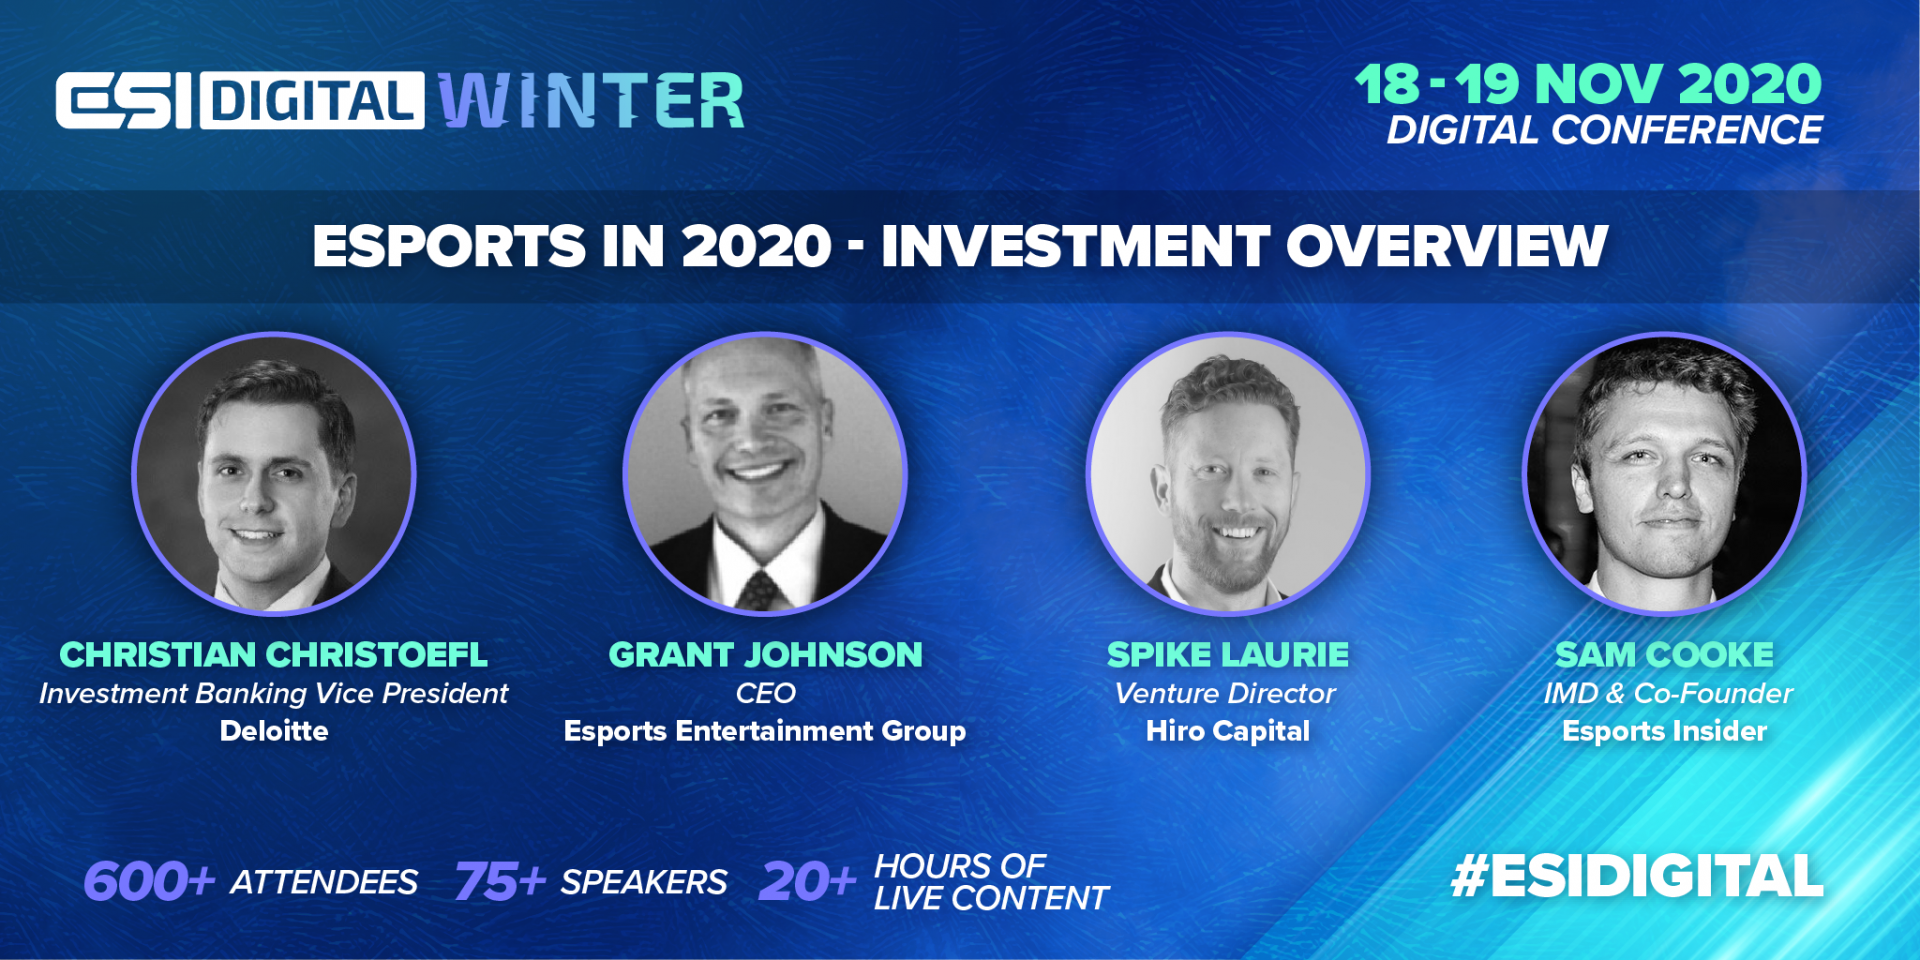 ESI Digital Winter Esports in 2020 Investment Overview